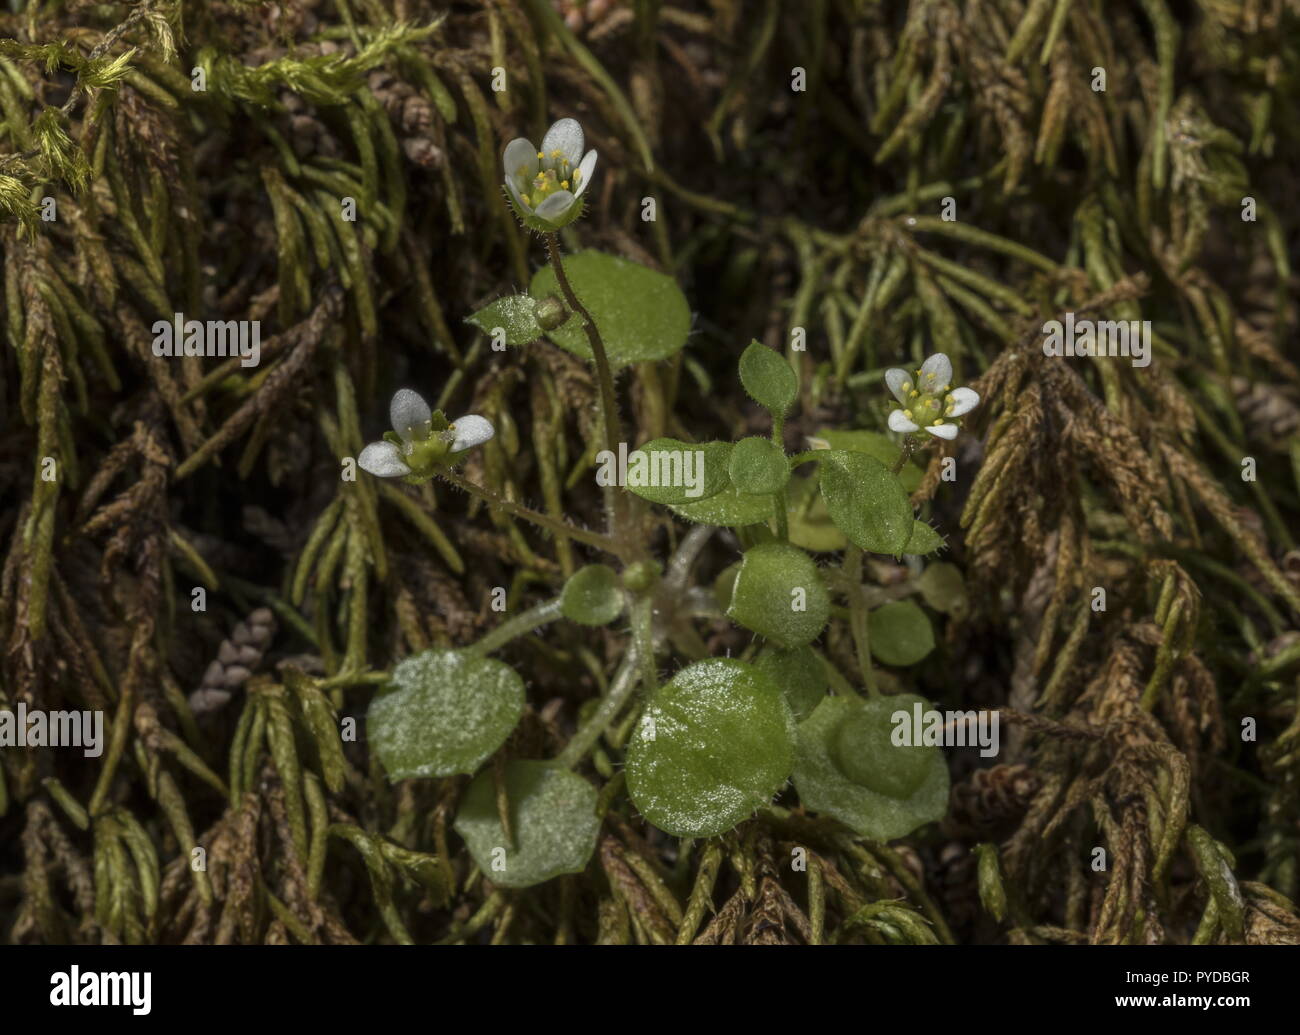 Ivy-leaved Saxifrage, Saxifraga hederacea growing on damp mossy cliff, Rhodes. Stock Photo